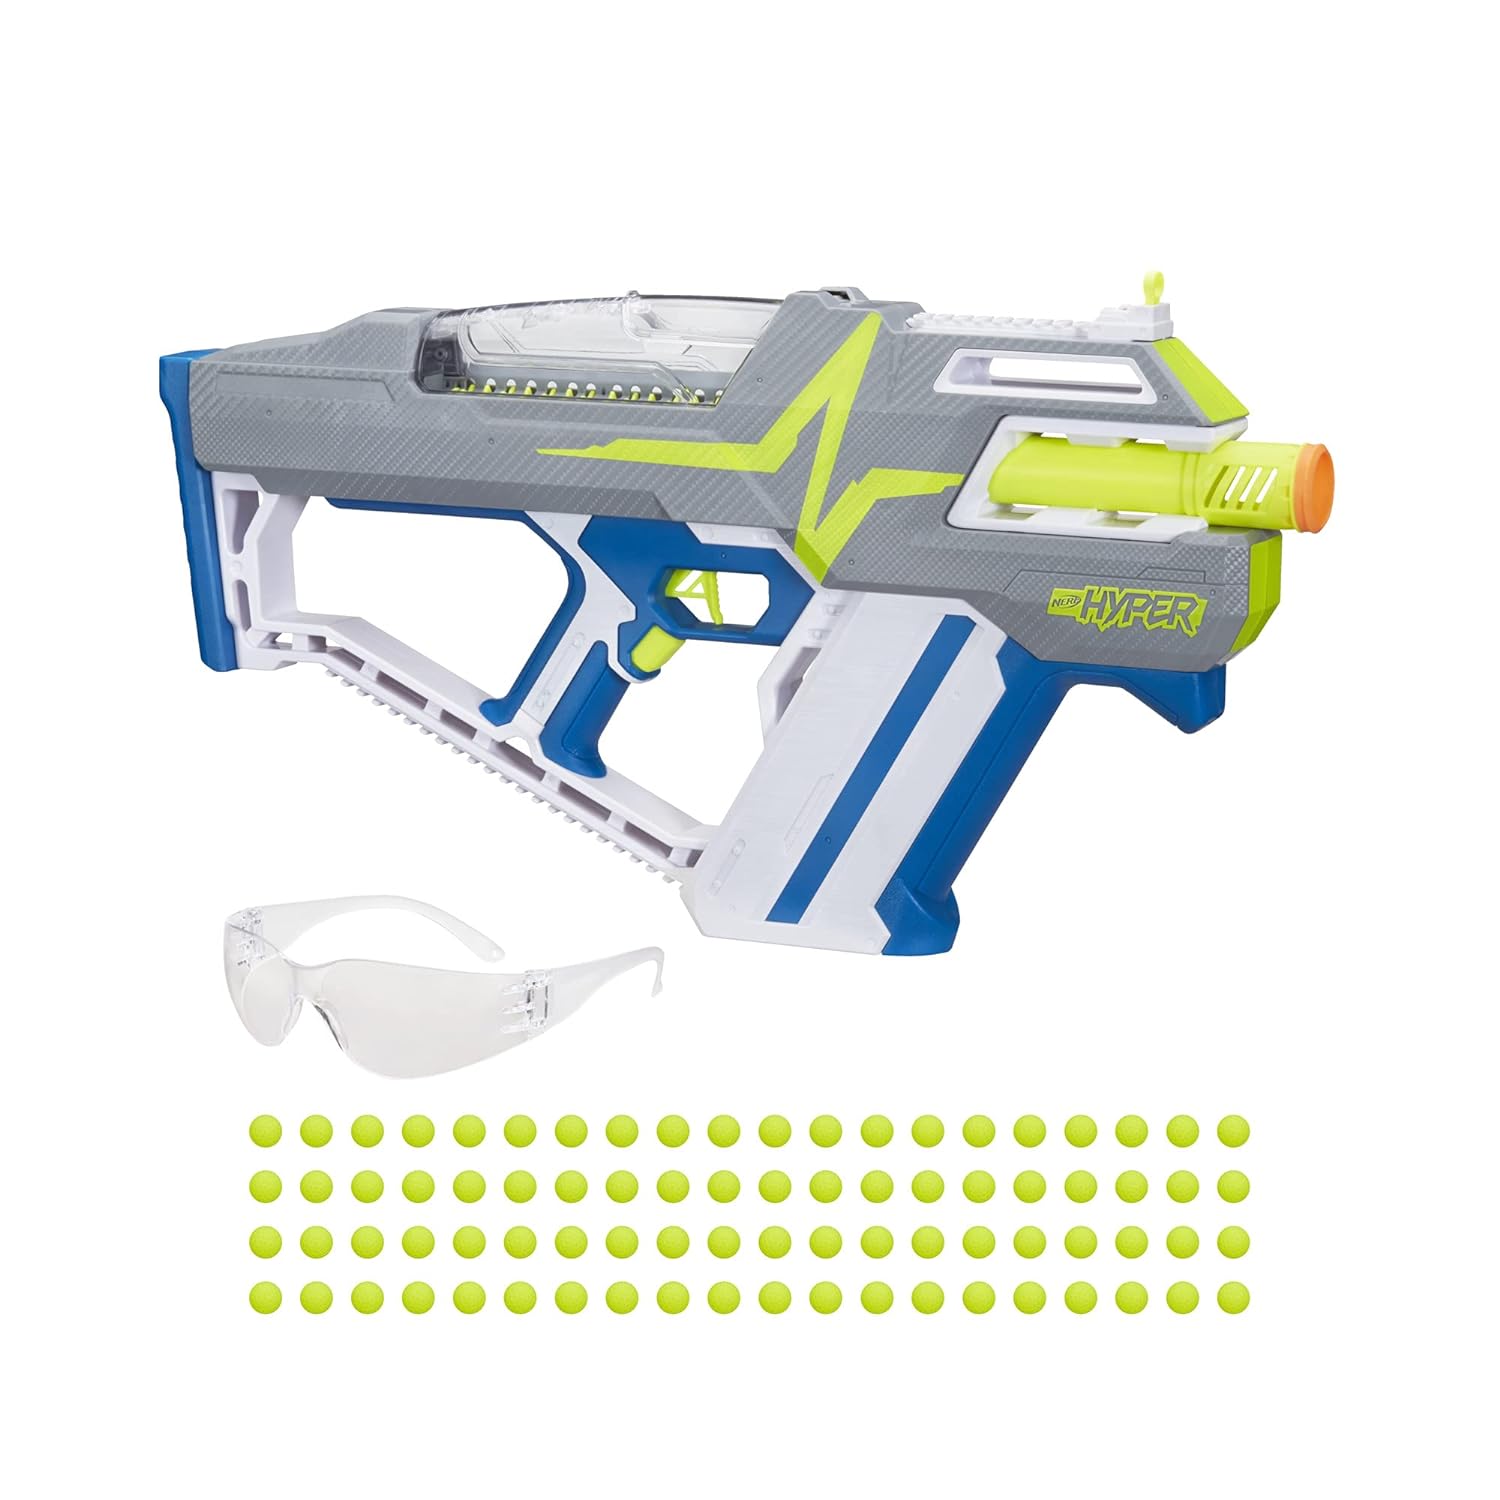 Hasbro Nerf Hyper Mach-100 Fully Motorized Blaster, 80 Hyper Rounds, Eyewear, Up To 110 Fps Velocity, Easy Reload, Holds Up To ?